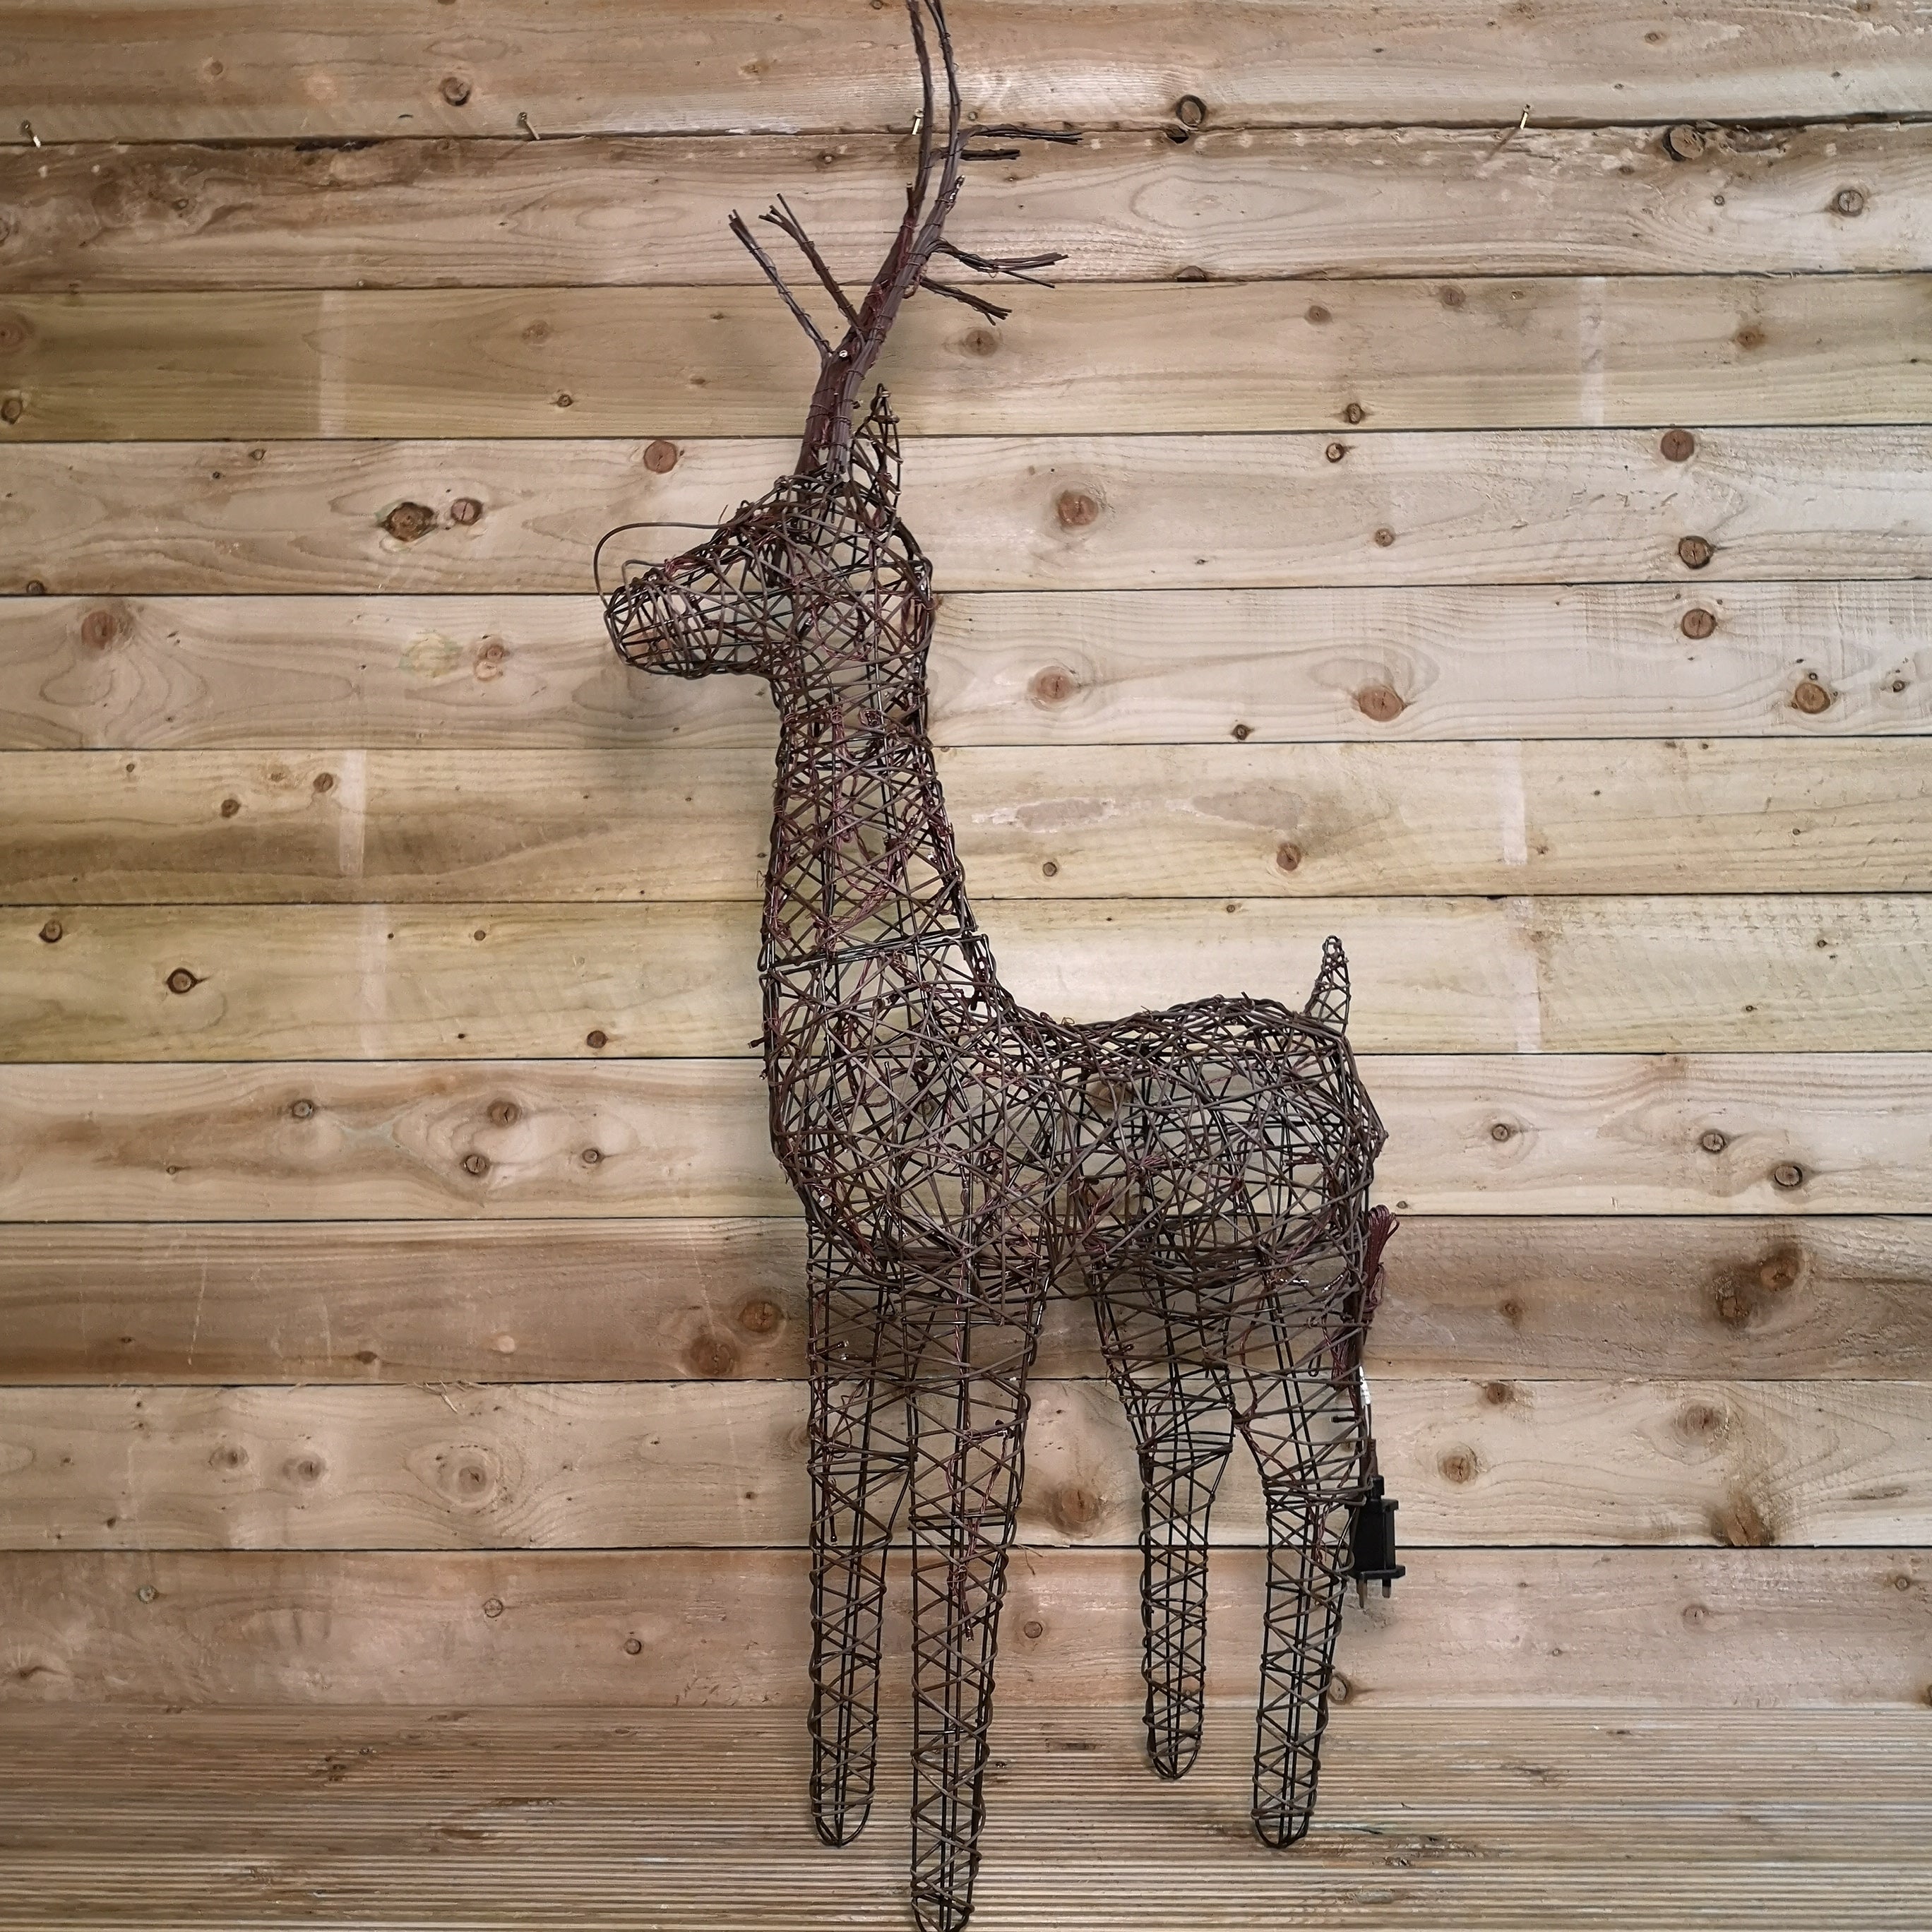 1m (53") Brown Outdoor Standing Wicker Reindeer Decoration With LED Lights